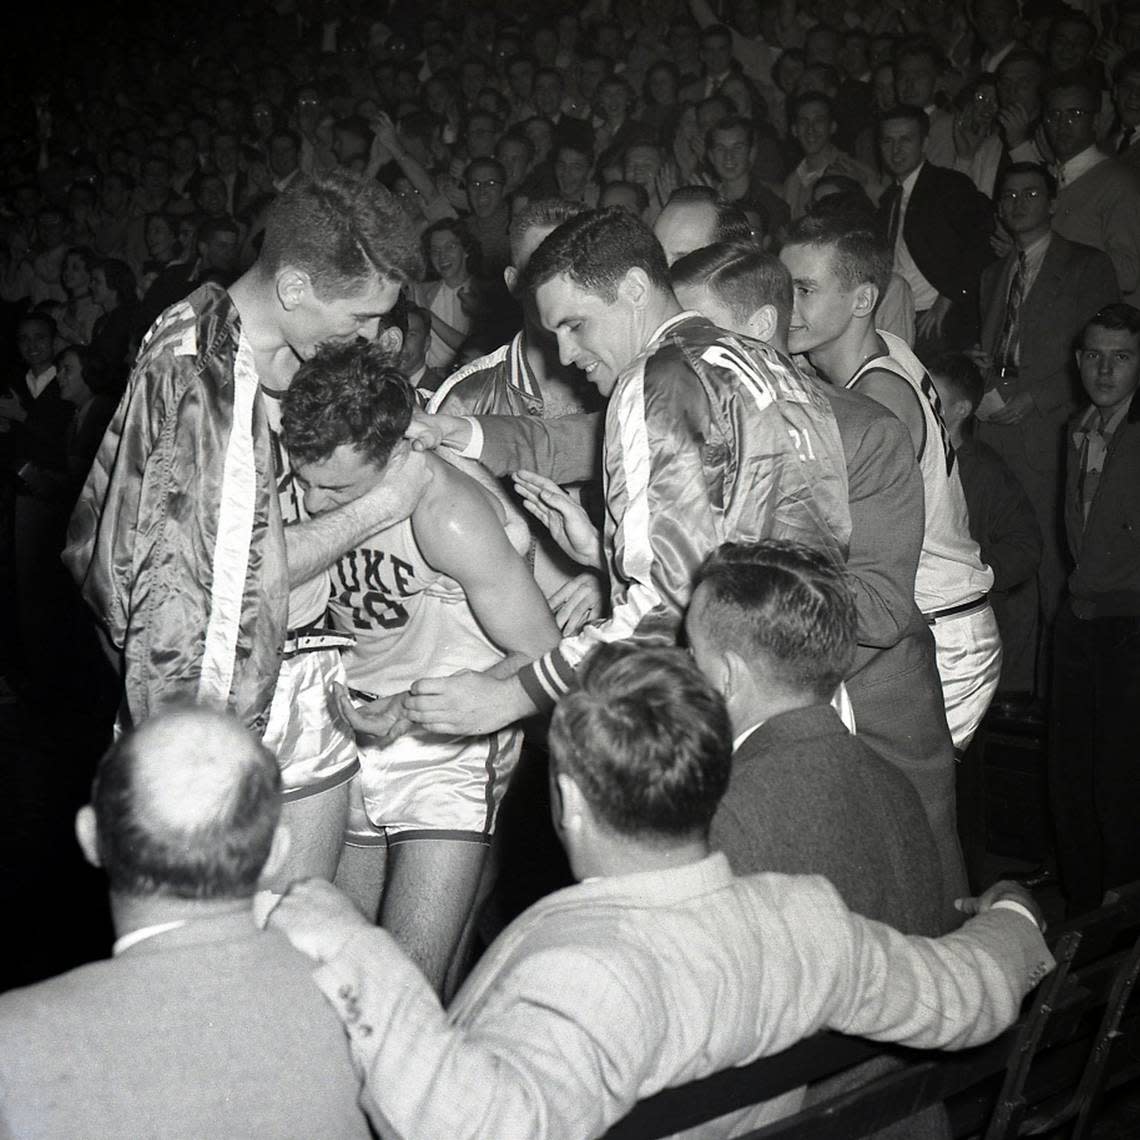 Dick Groat receives congratulations after breaking Duke’s scoring record by scoring 48 points against North Carolina on Feb. 29, 1952. File photo